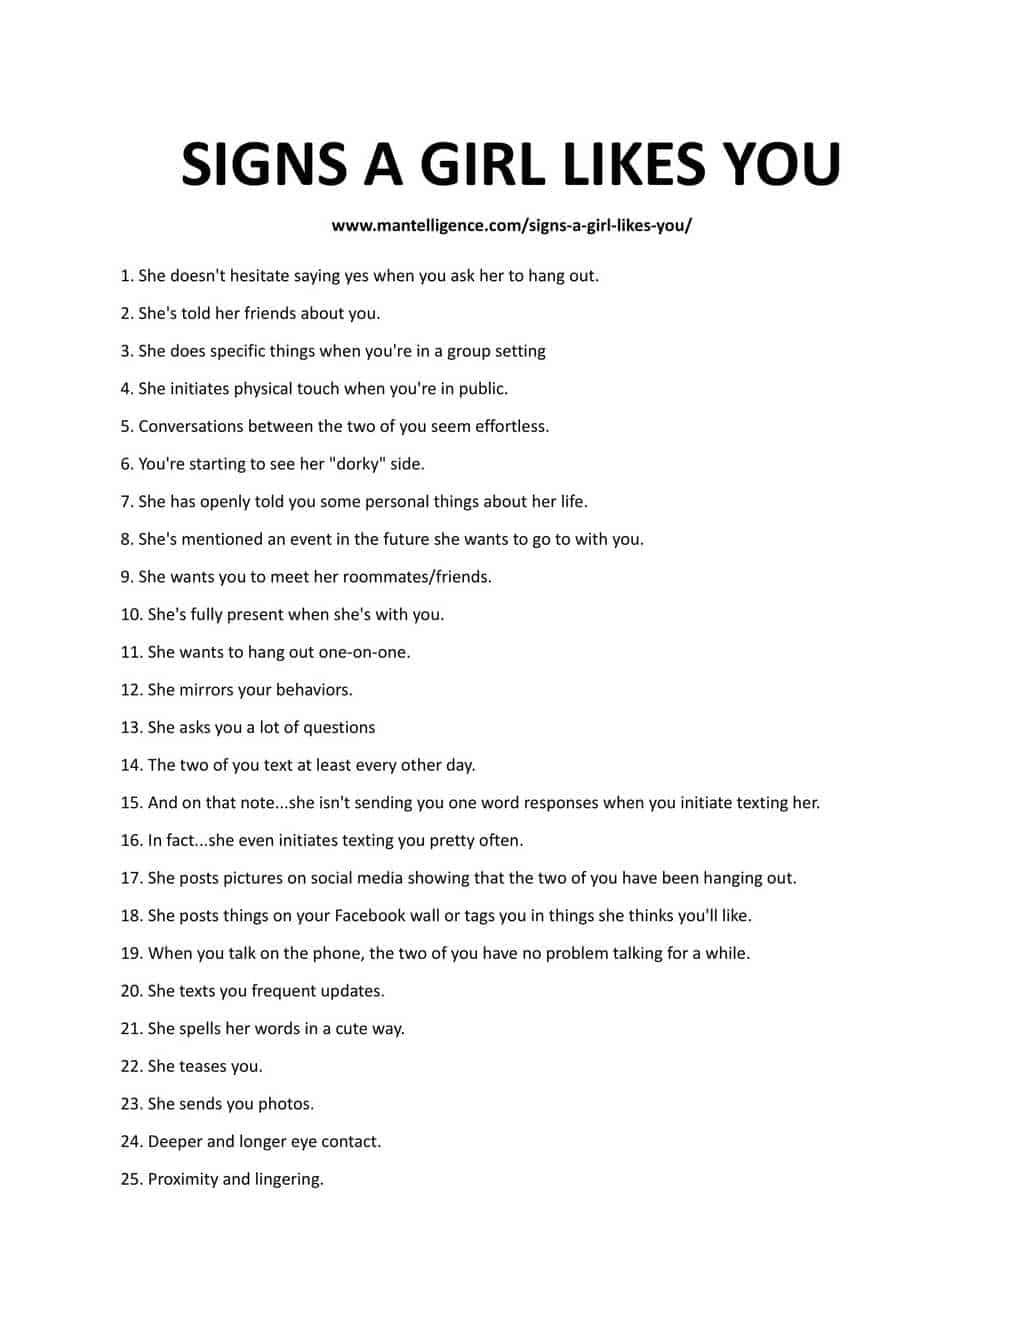 You online signs a likes woman 10 Physical